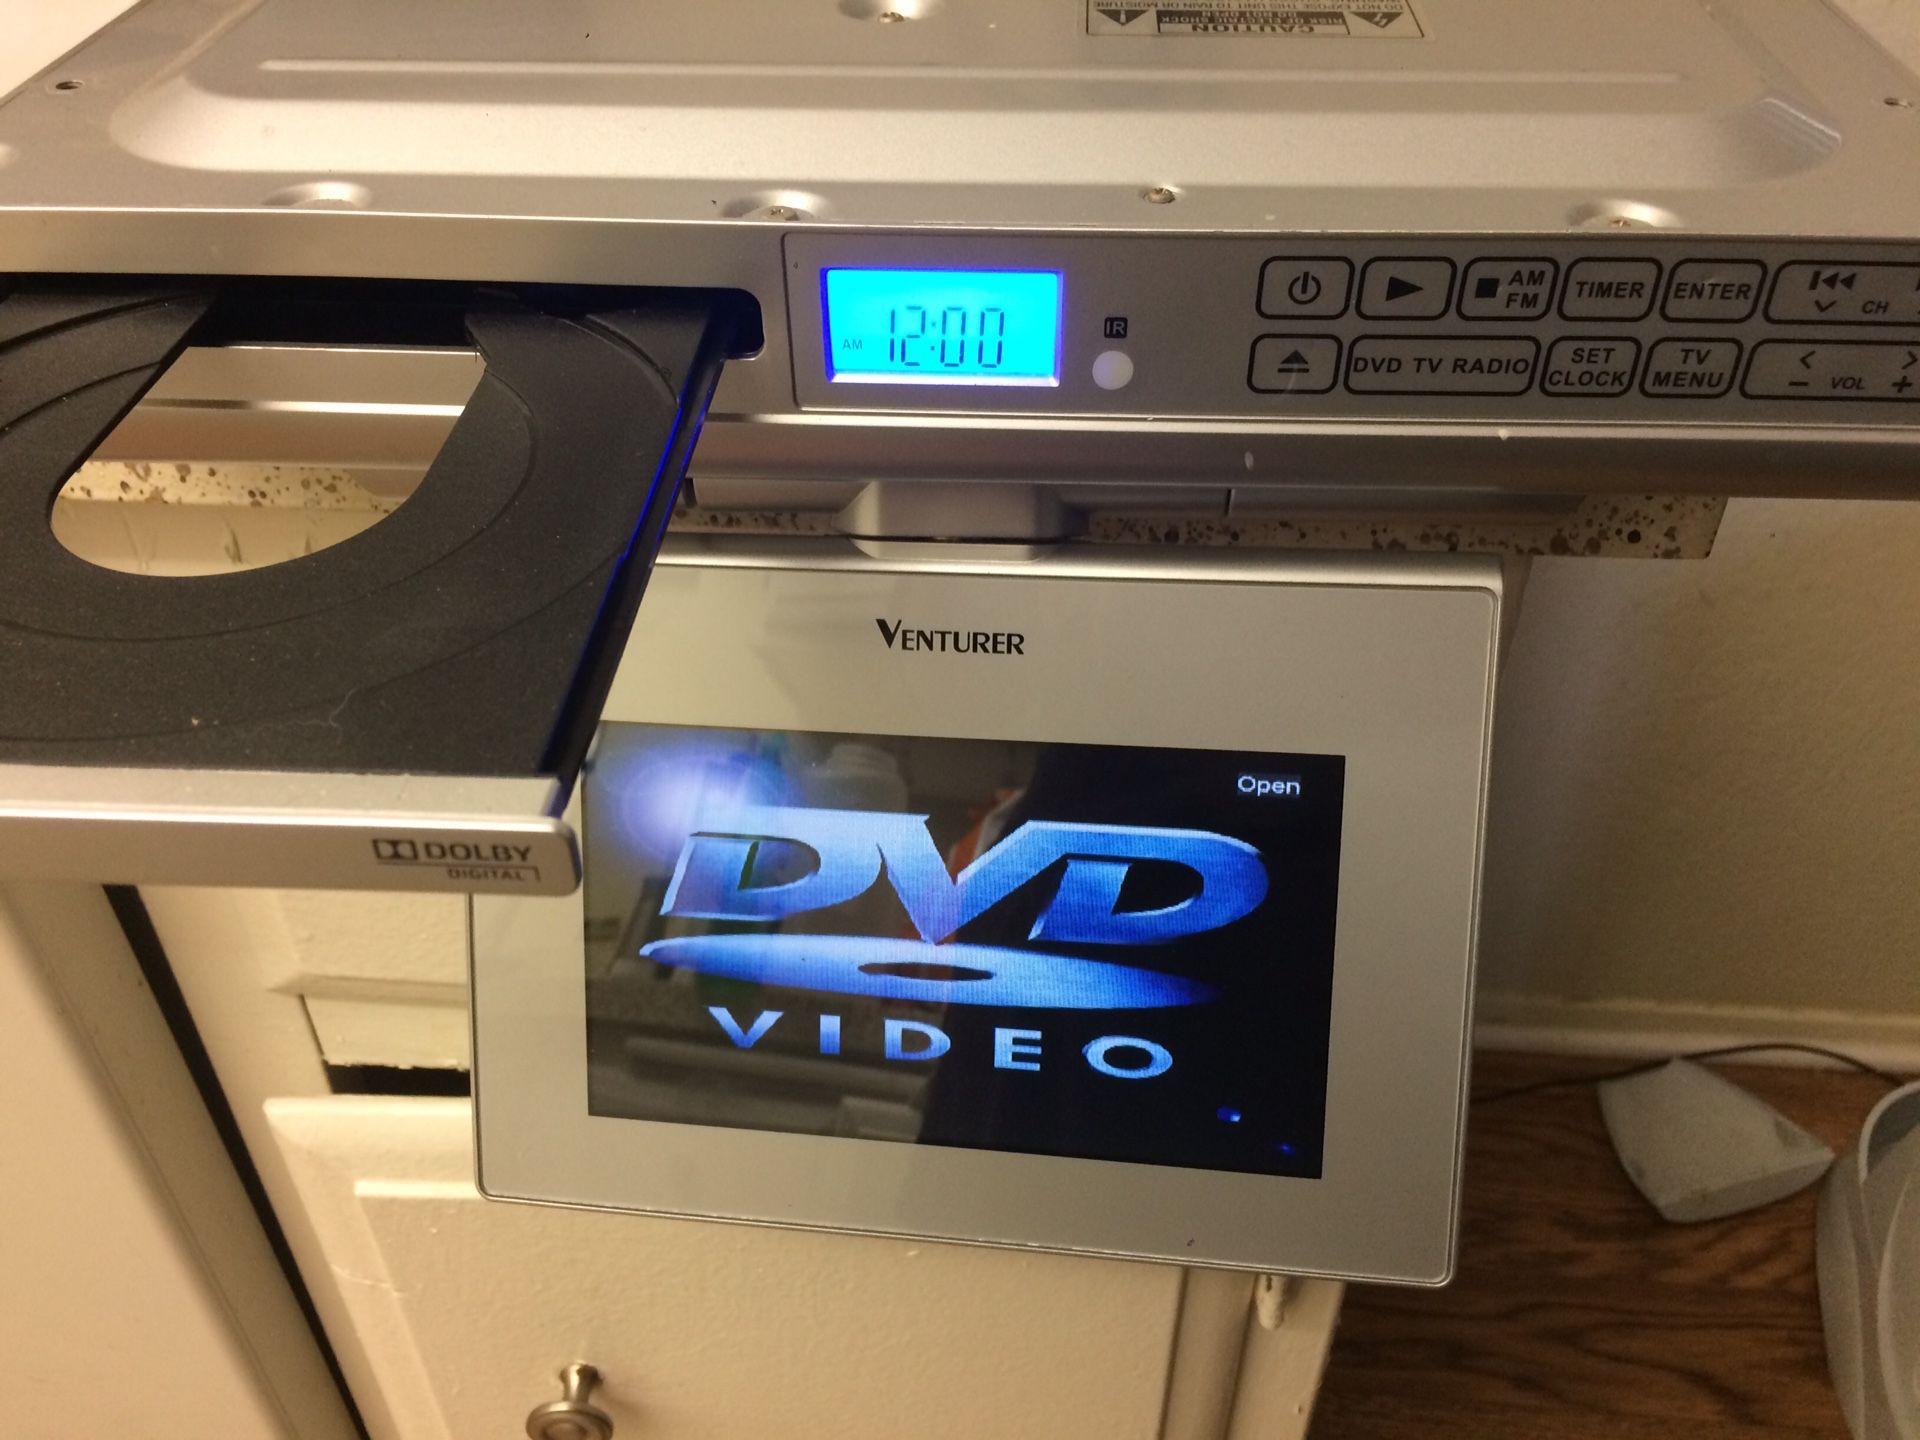 DVD/CD/radio to be mounted under counter